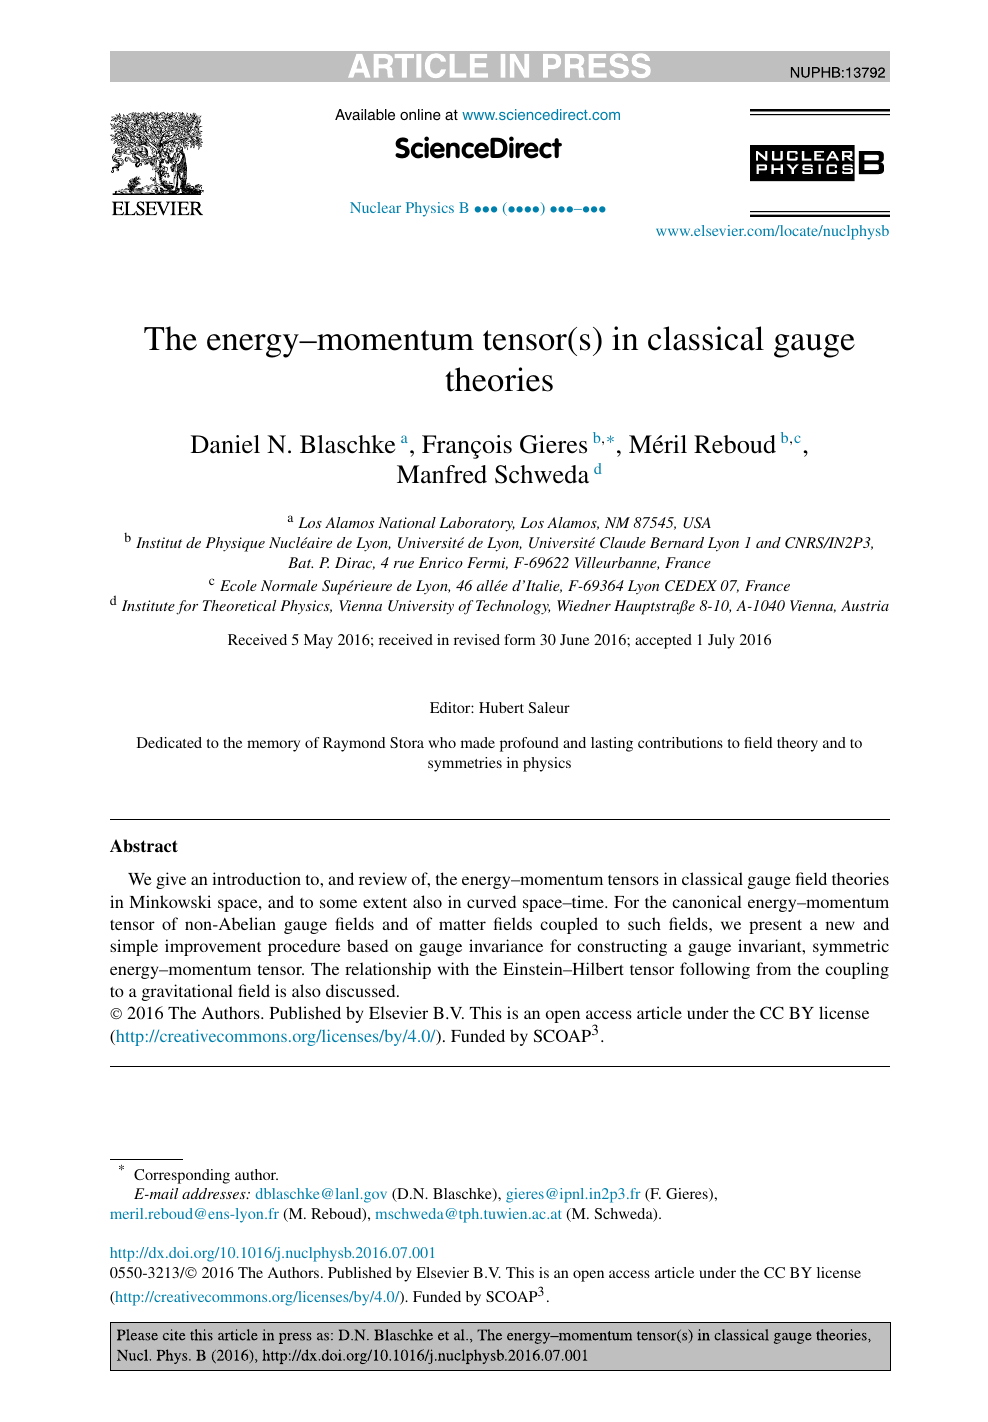 The Energy Momentum Tensor S In Classical Gauge Theories Topic Of Research Paper In Physical Sciences Download Scholarly Article Pdf And Read For Free On Cyberleninka Open Science Hub